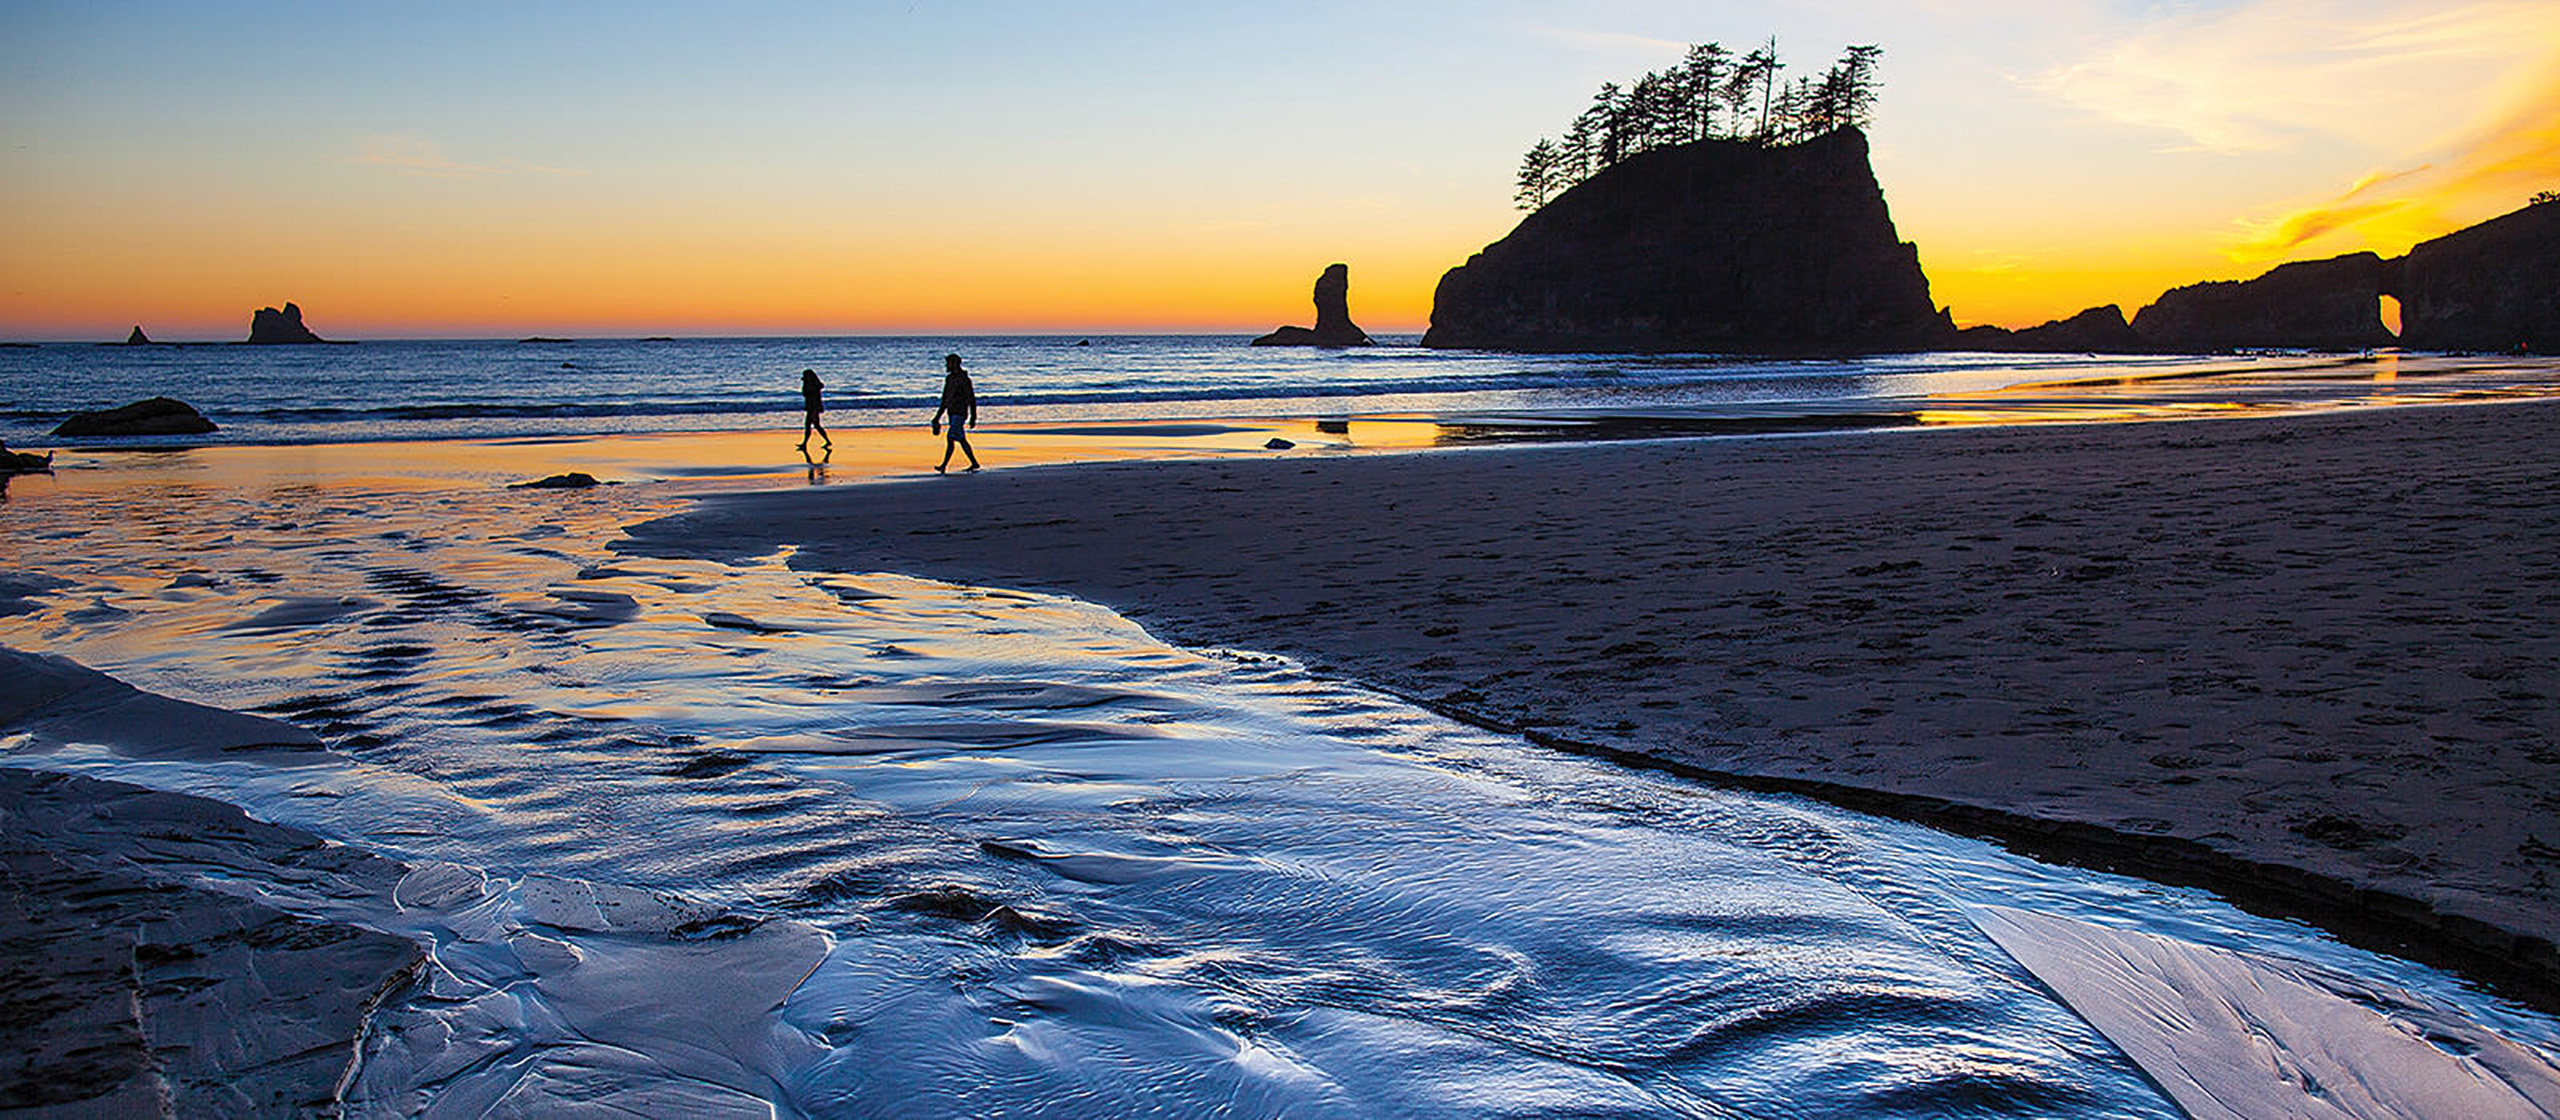 A stream flow down a beach to the ocean with silhouettes of humans walking and a distant sea stack at sunset